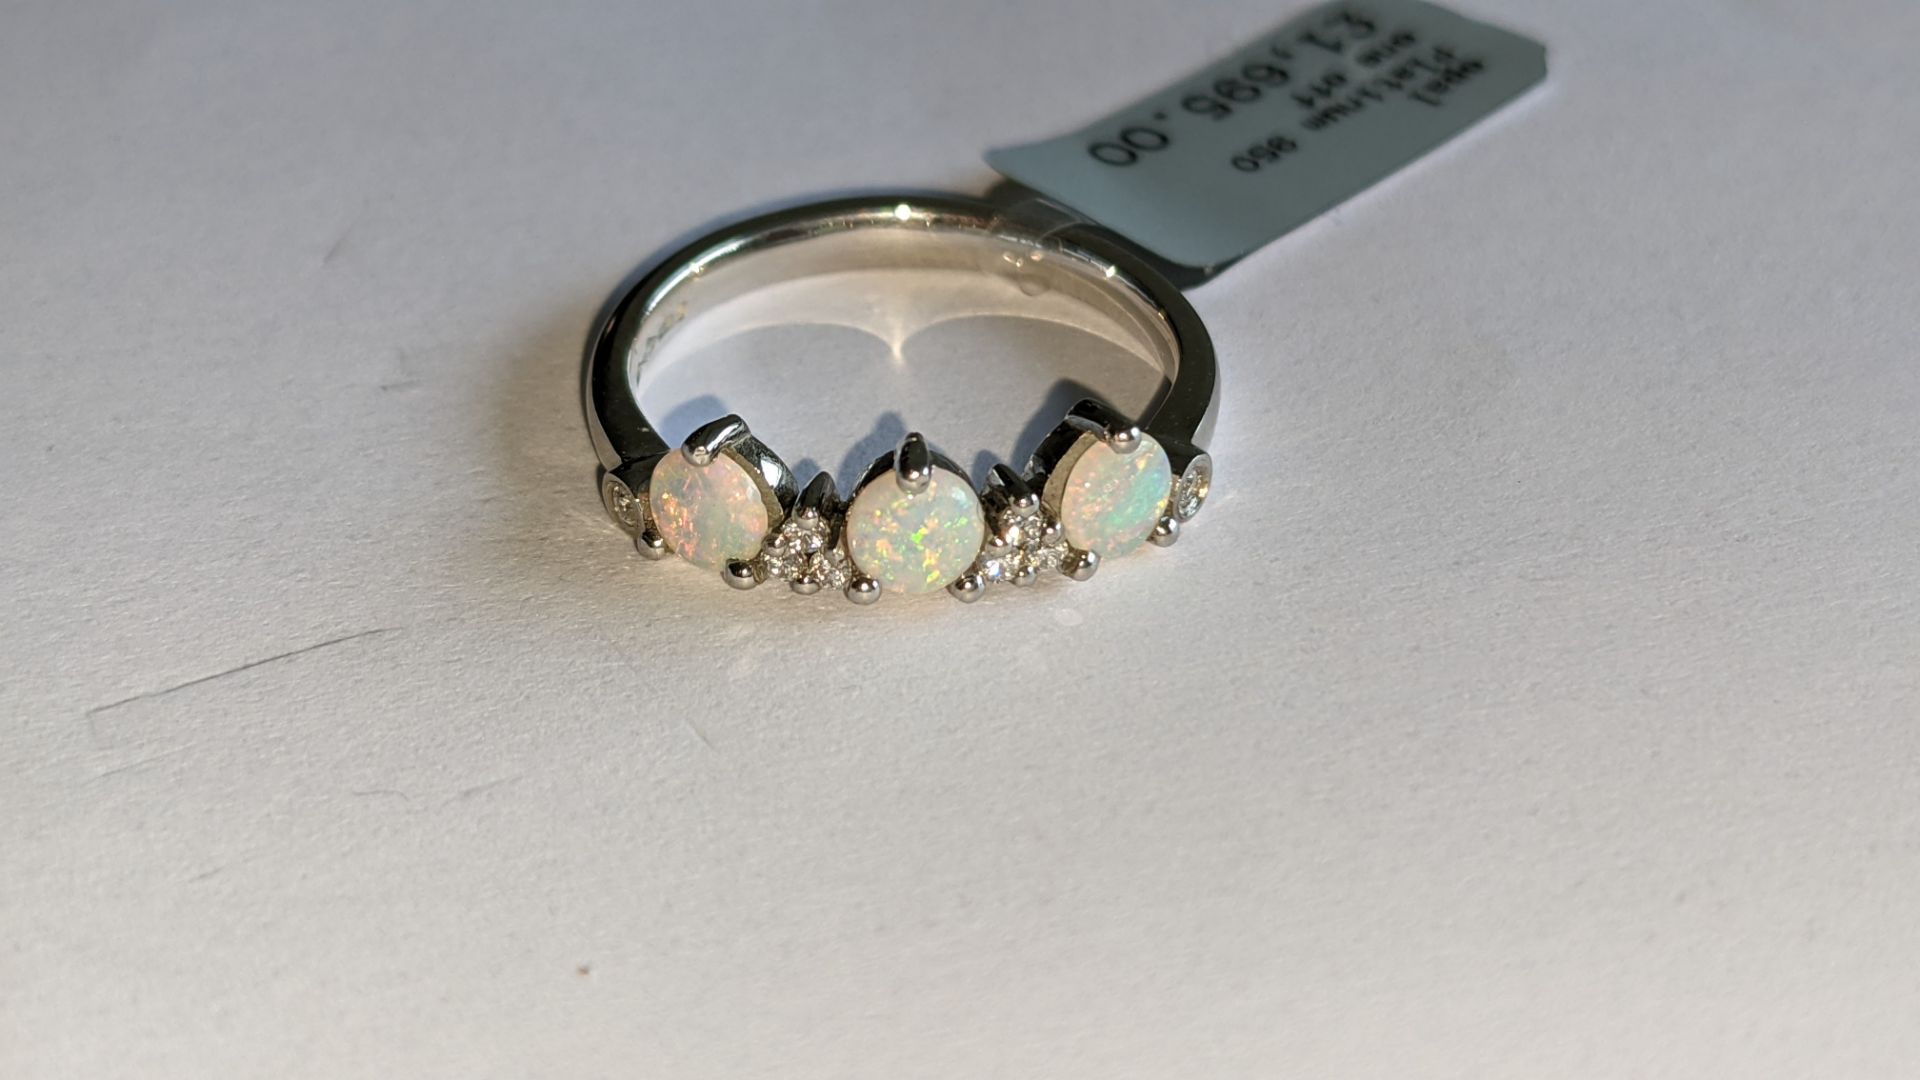 Platinum 950 ring with opals & diamonds, RRP £1,695 - Image 10 of 18